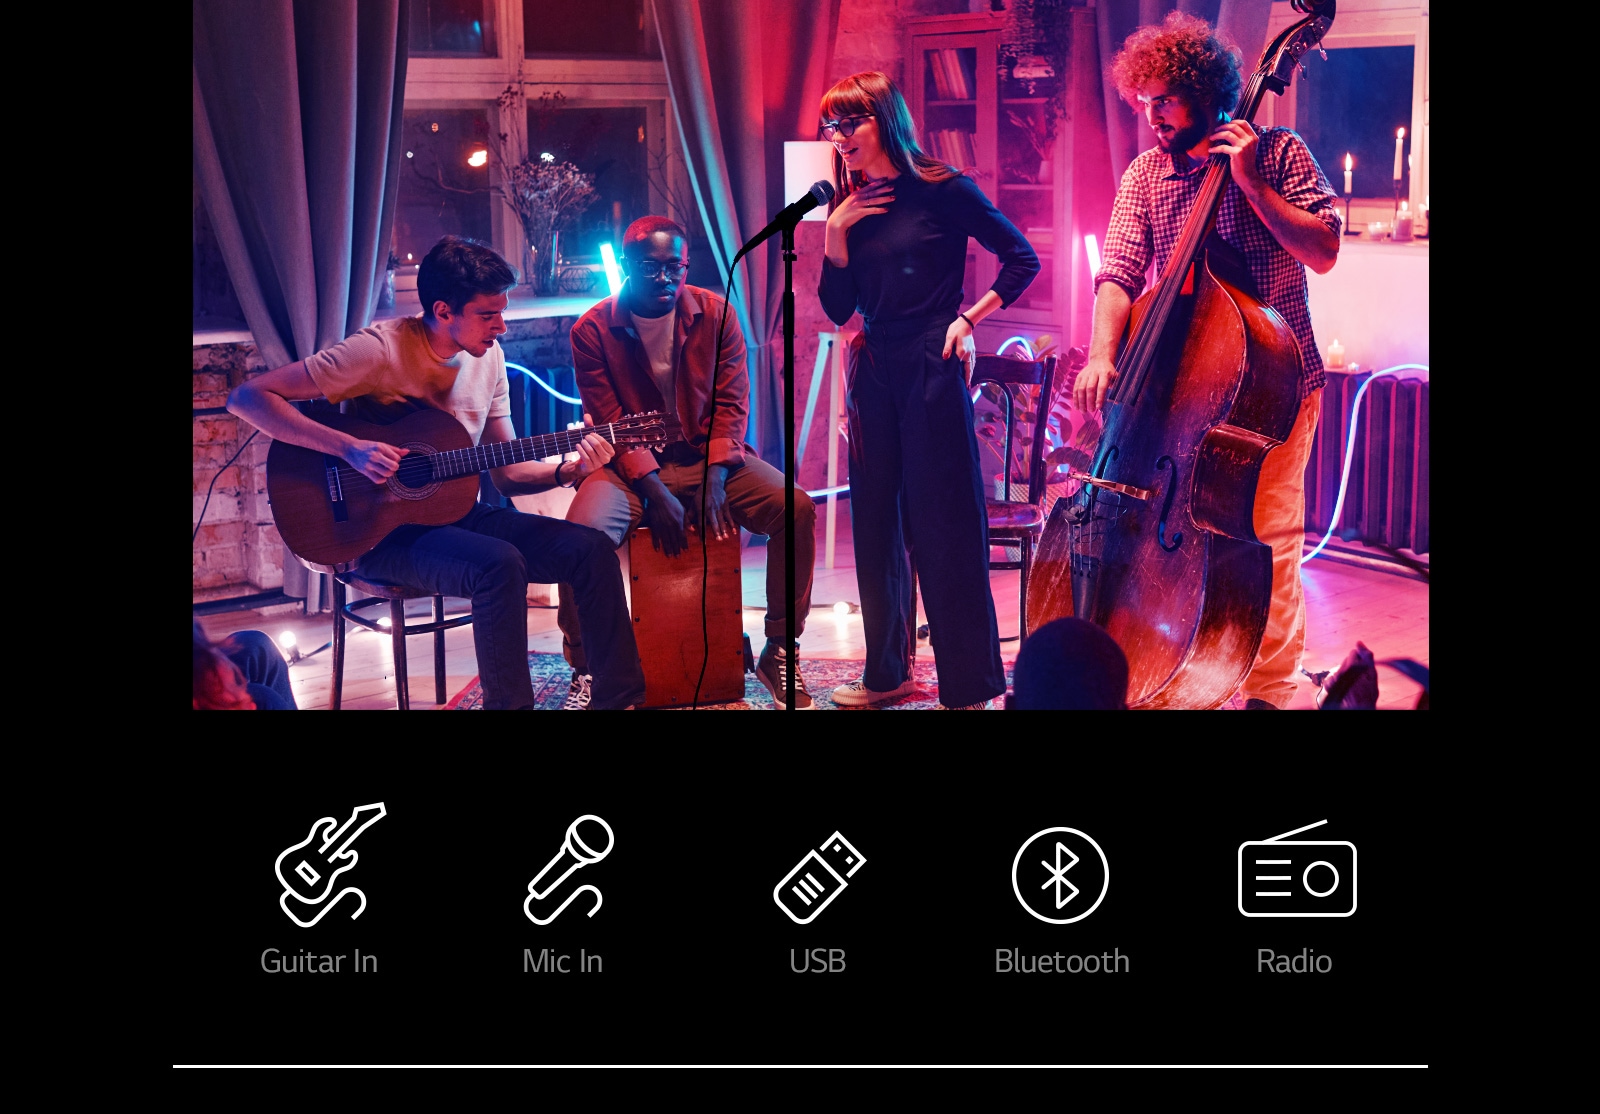 LG RNC9 A concert scene. Connectivity icons are shown below the image.